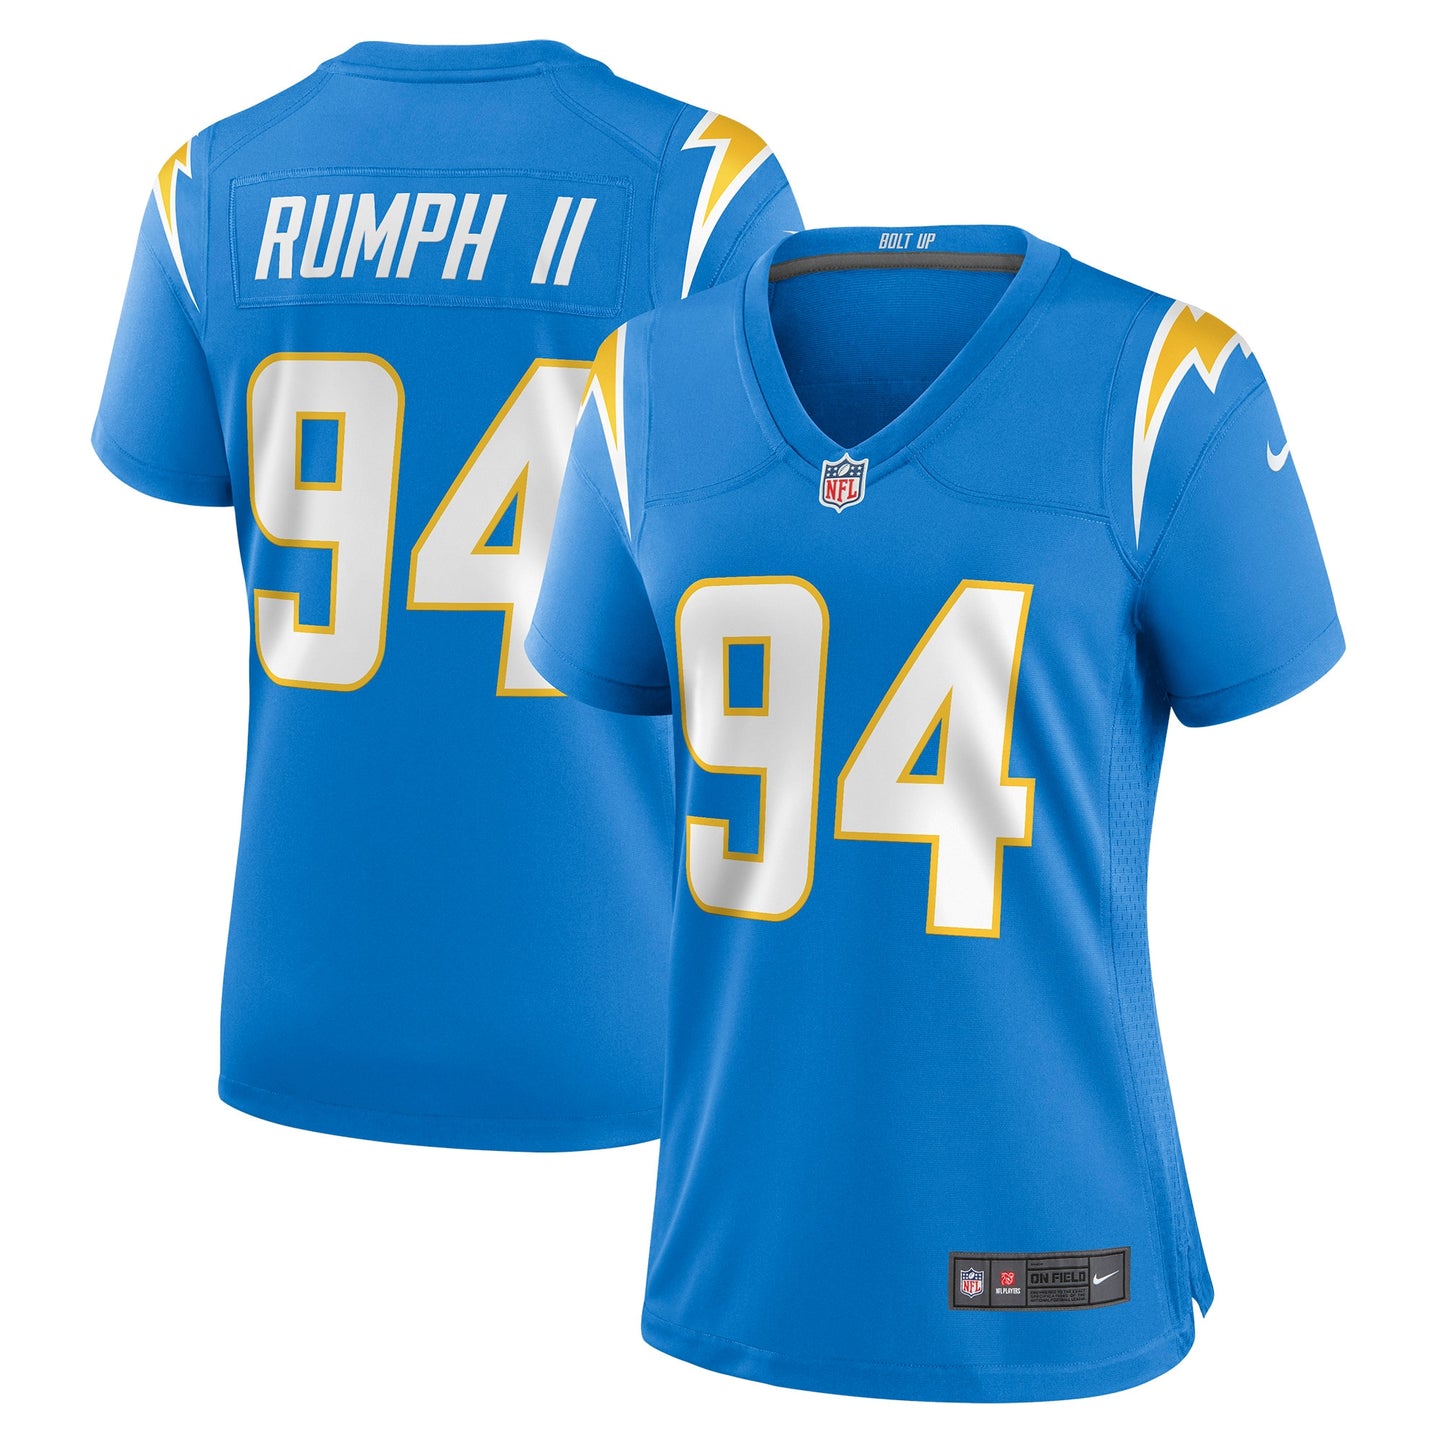 Chris Rumph II Los Angeles Chargers Nike Women's Game Jersey - Powder Blue